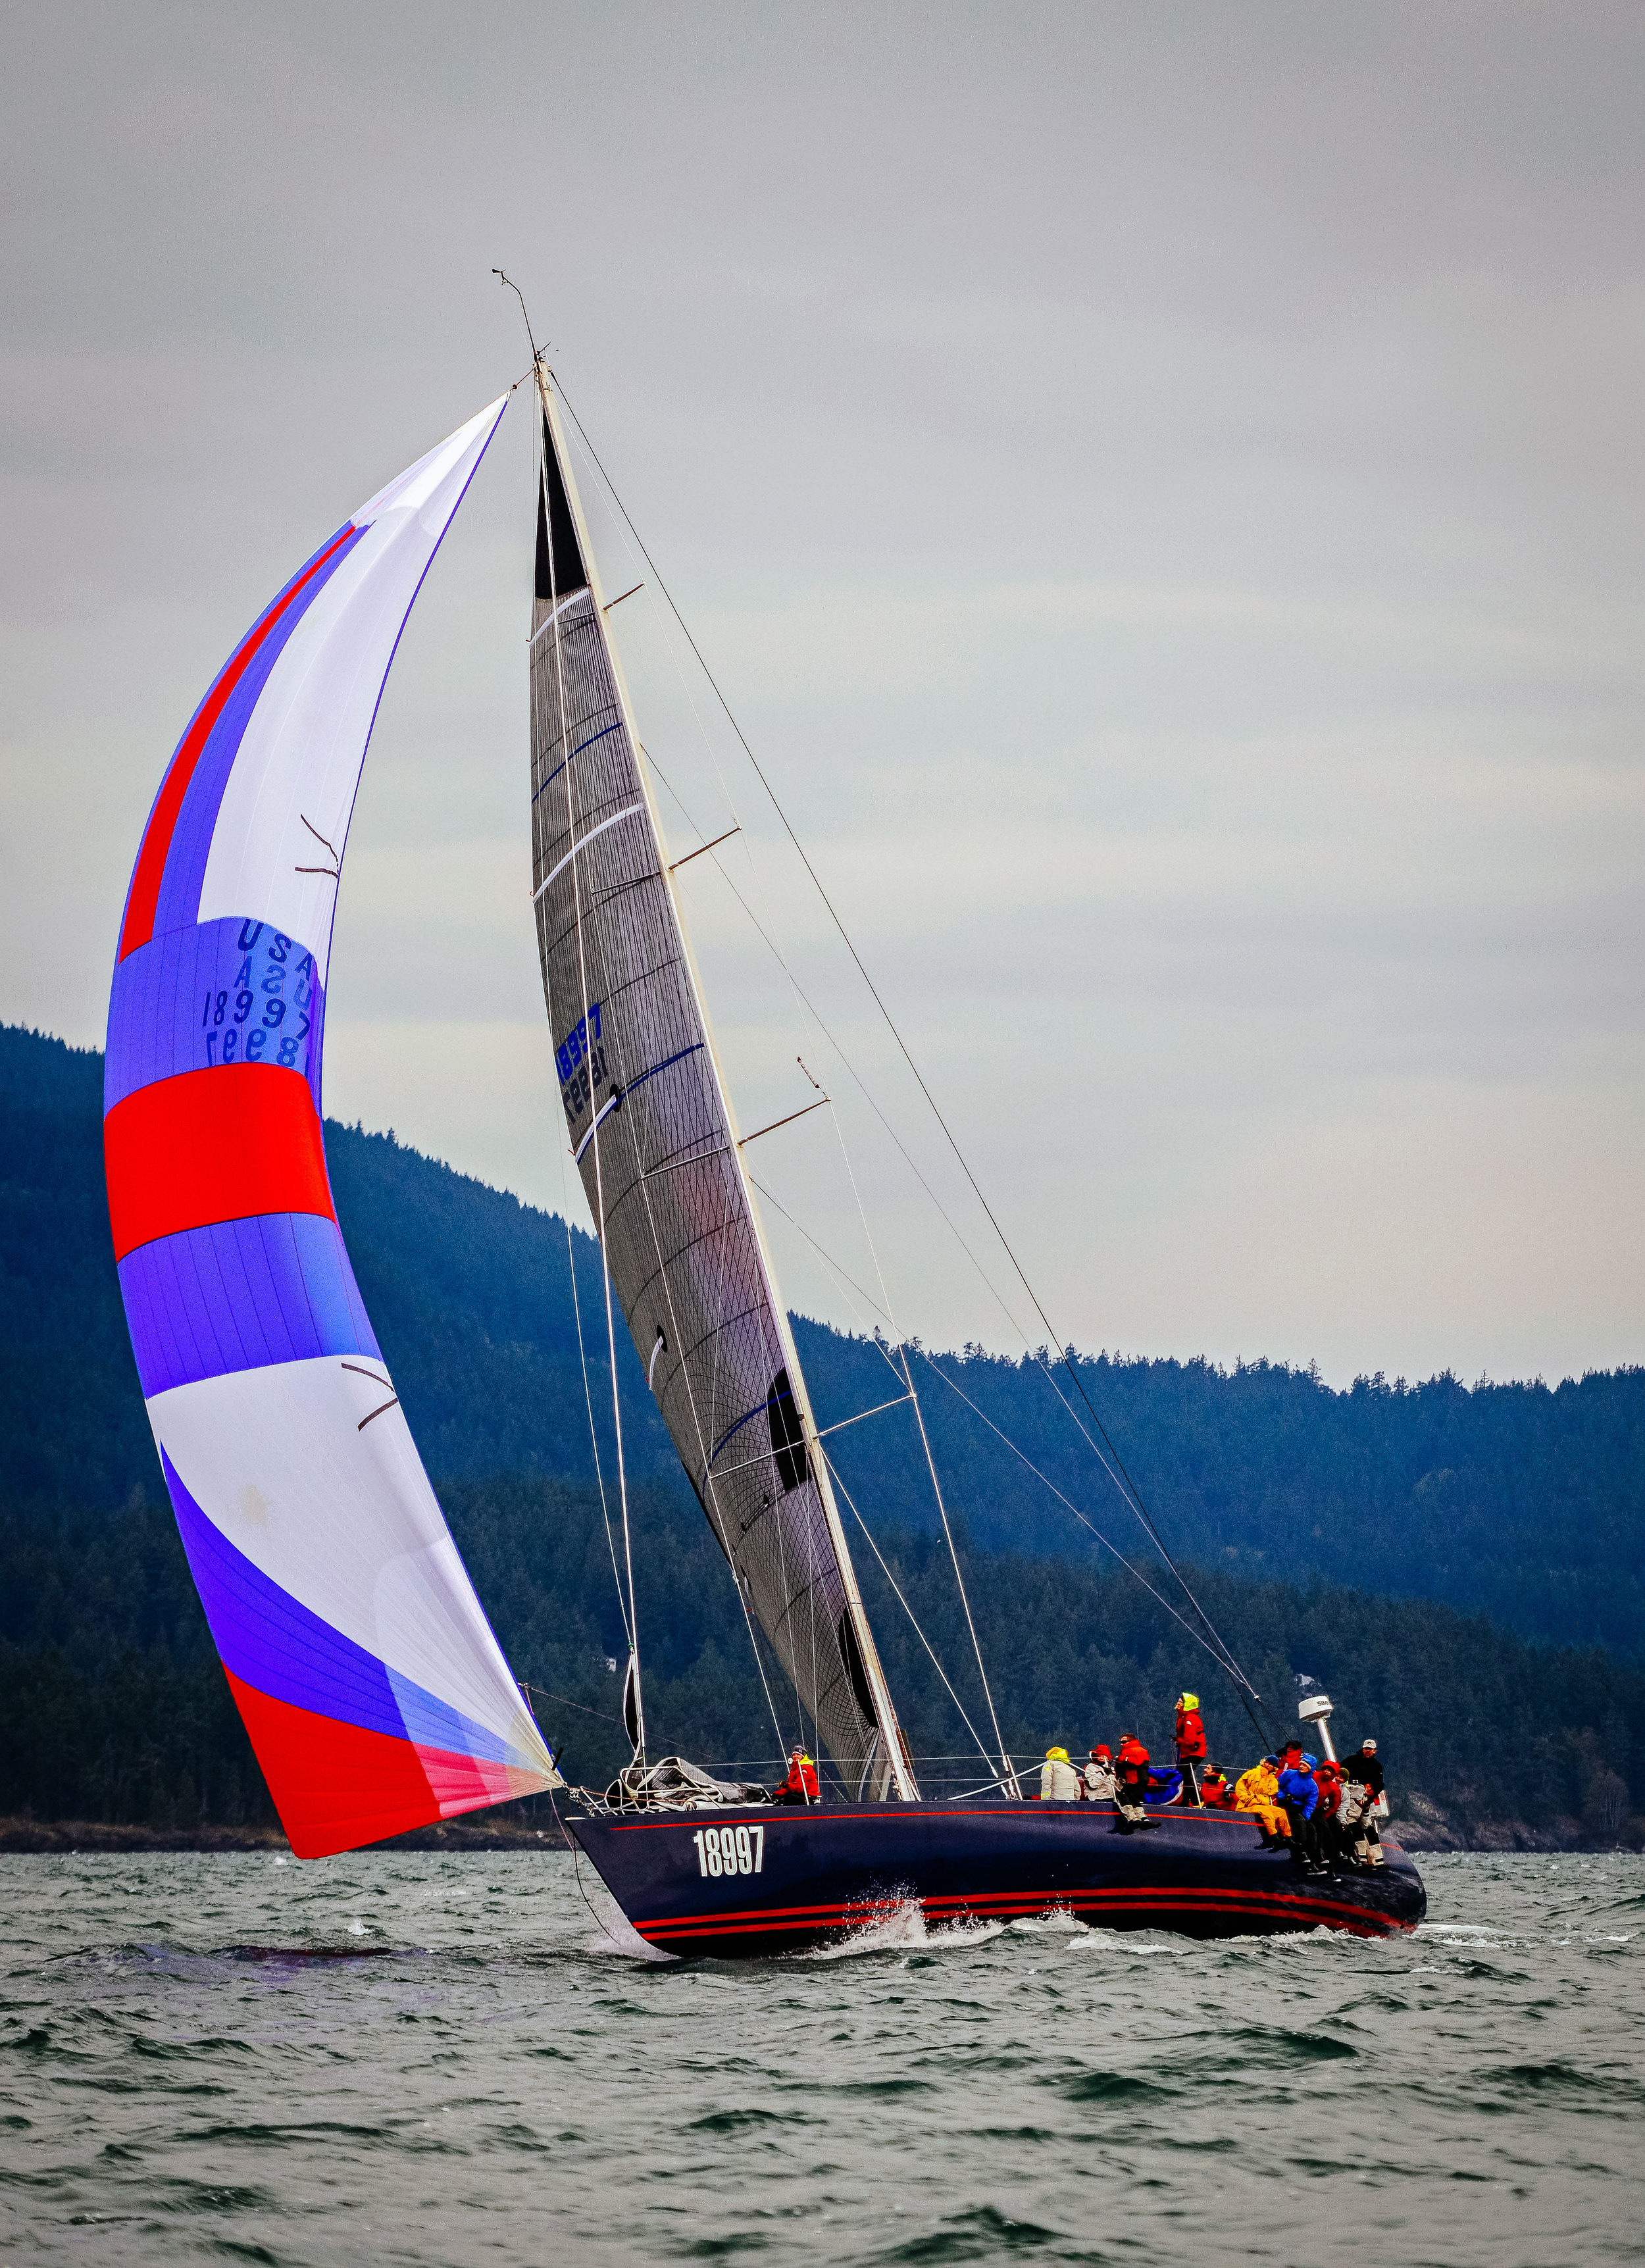 The Santa Cruz 70 WESTERLY sailing with her A4.